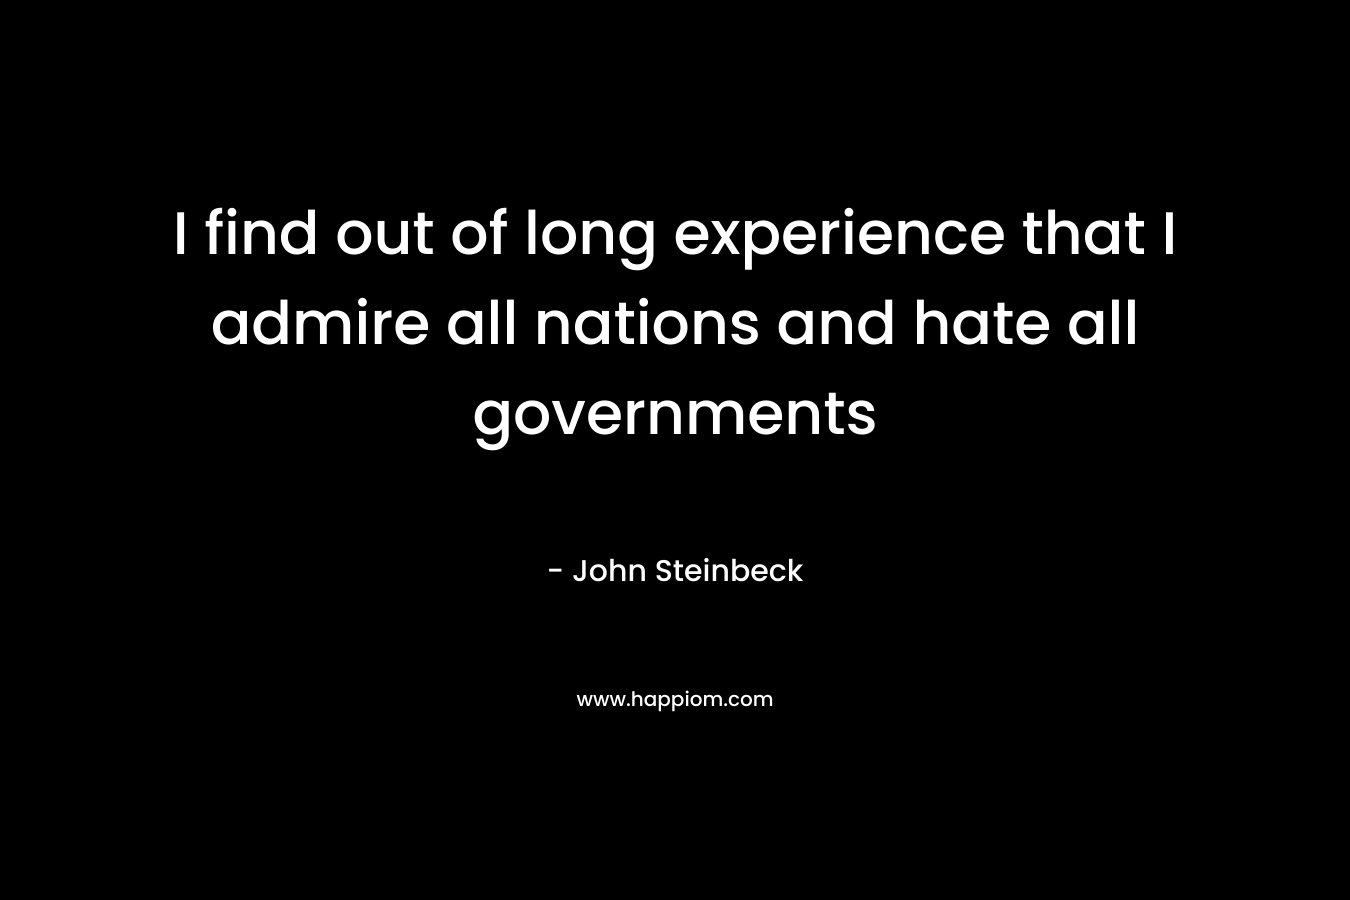 I find out of long experience that I admire all nations and hate all governments